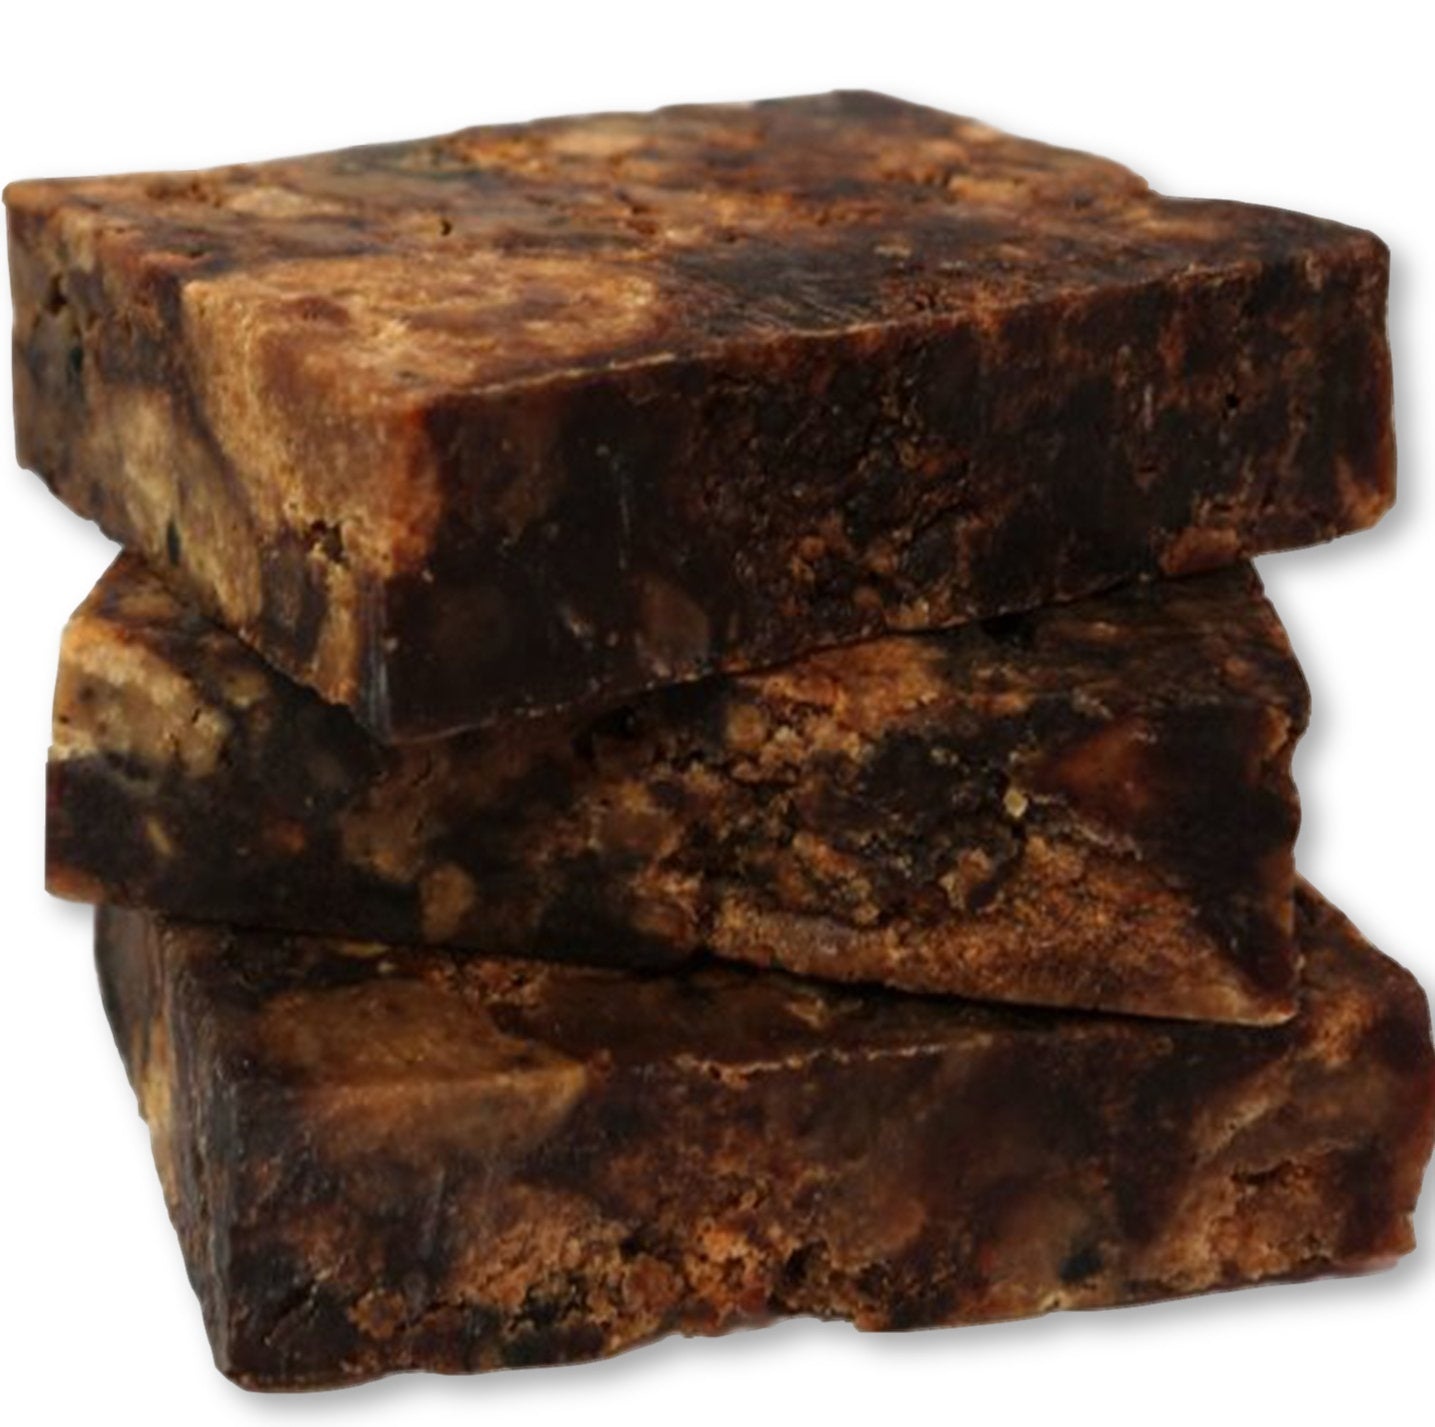 AFRICAN BLACK SOAP BENEFITS FOR ALL SKIN TYPES